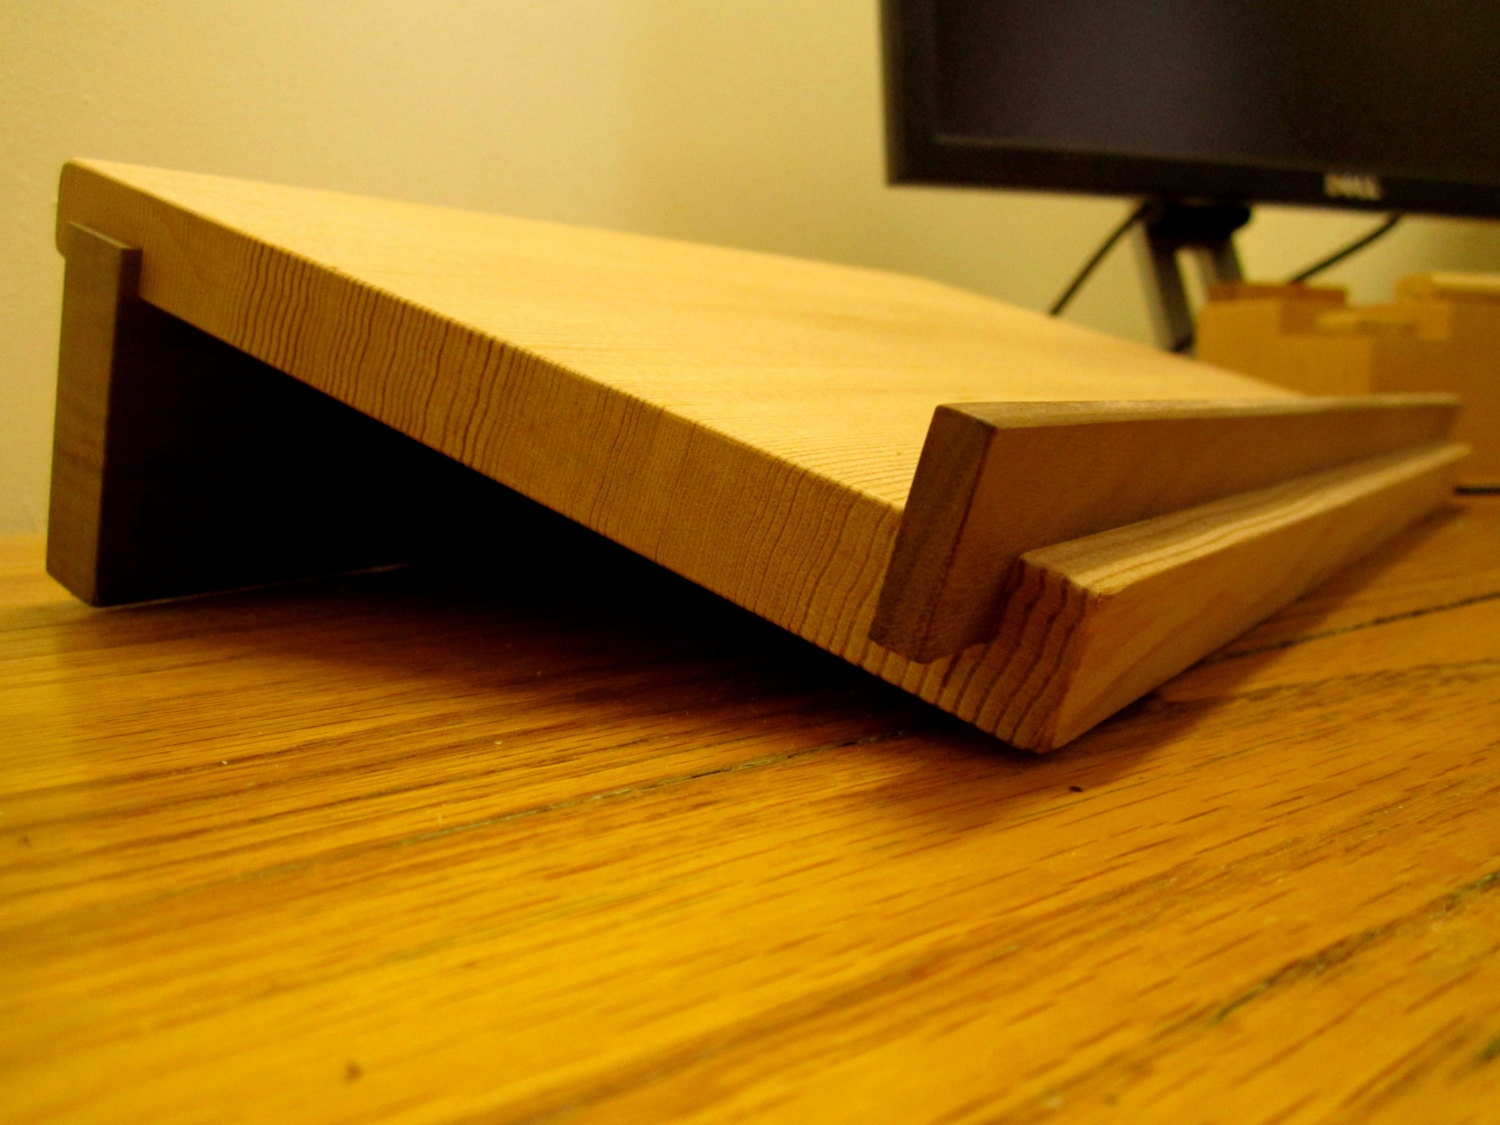 Wooden Laptop Stand by MatchlessMade on Etsy